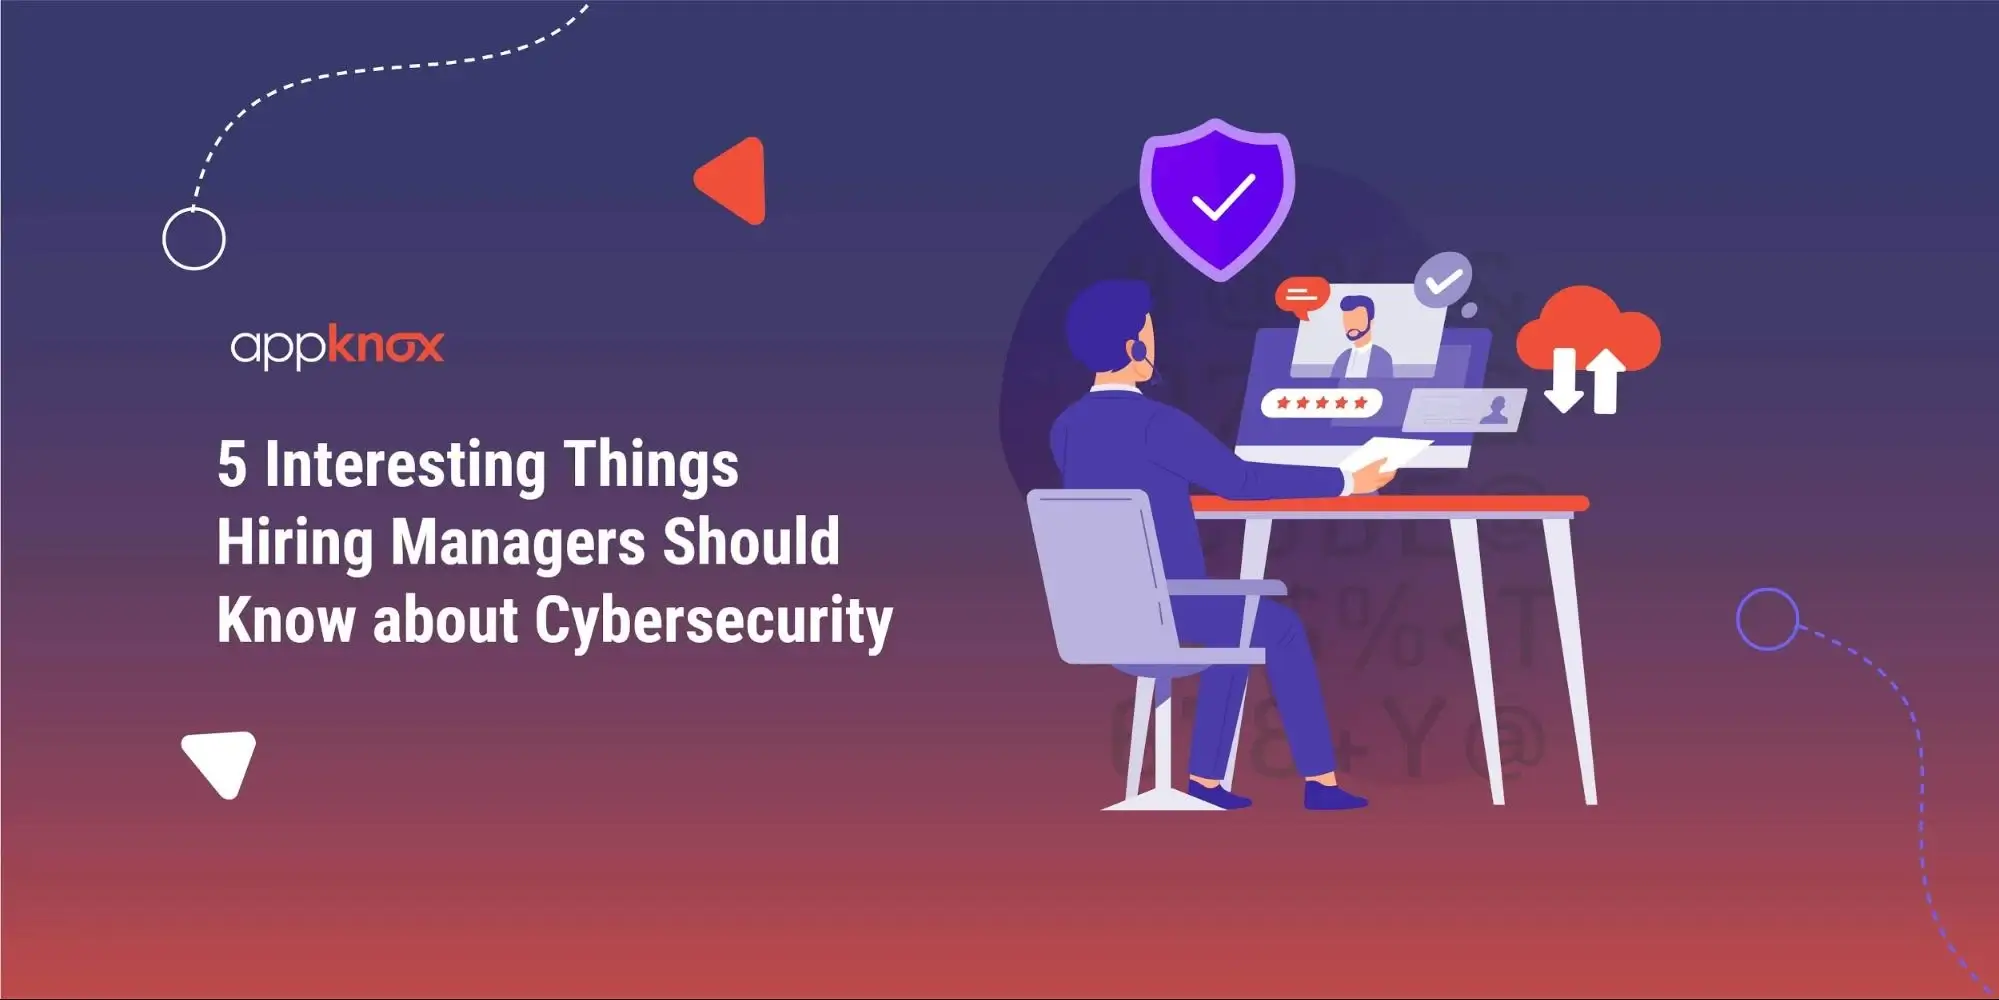 5 Interesting Things Hiring Managers Should Know about Cybersecurity